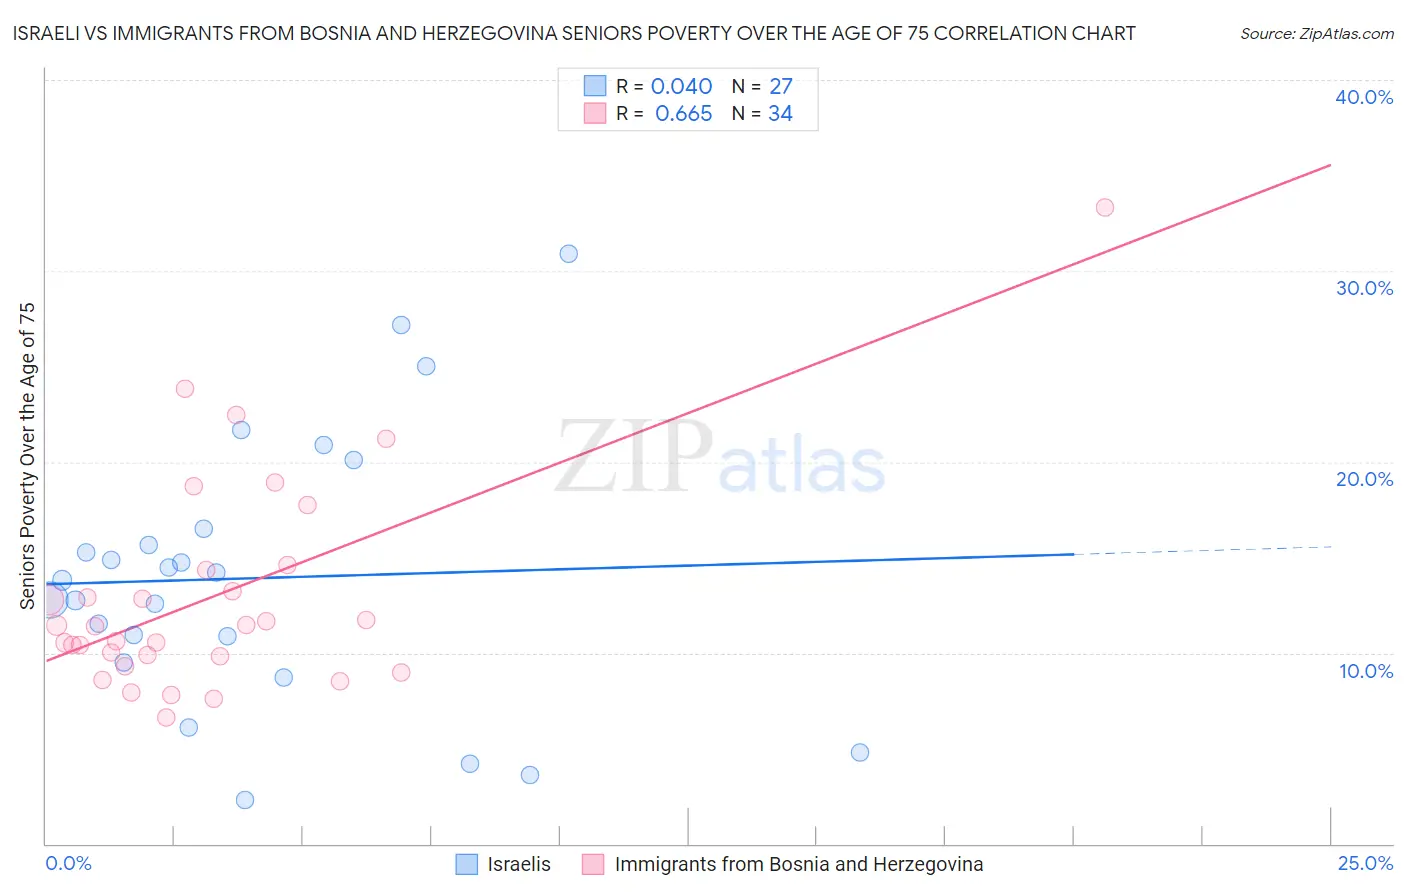 Israeli vs Immigrants from Bosnia and Herzegovina Seniors Poverty Over the Age of 75